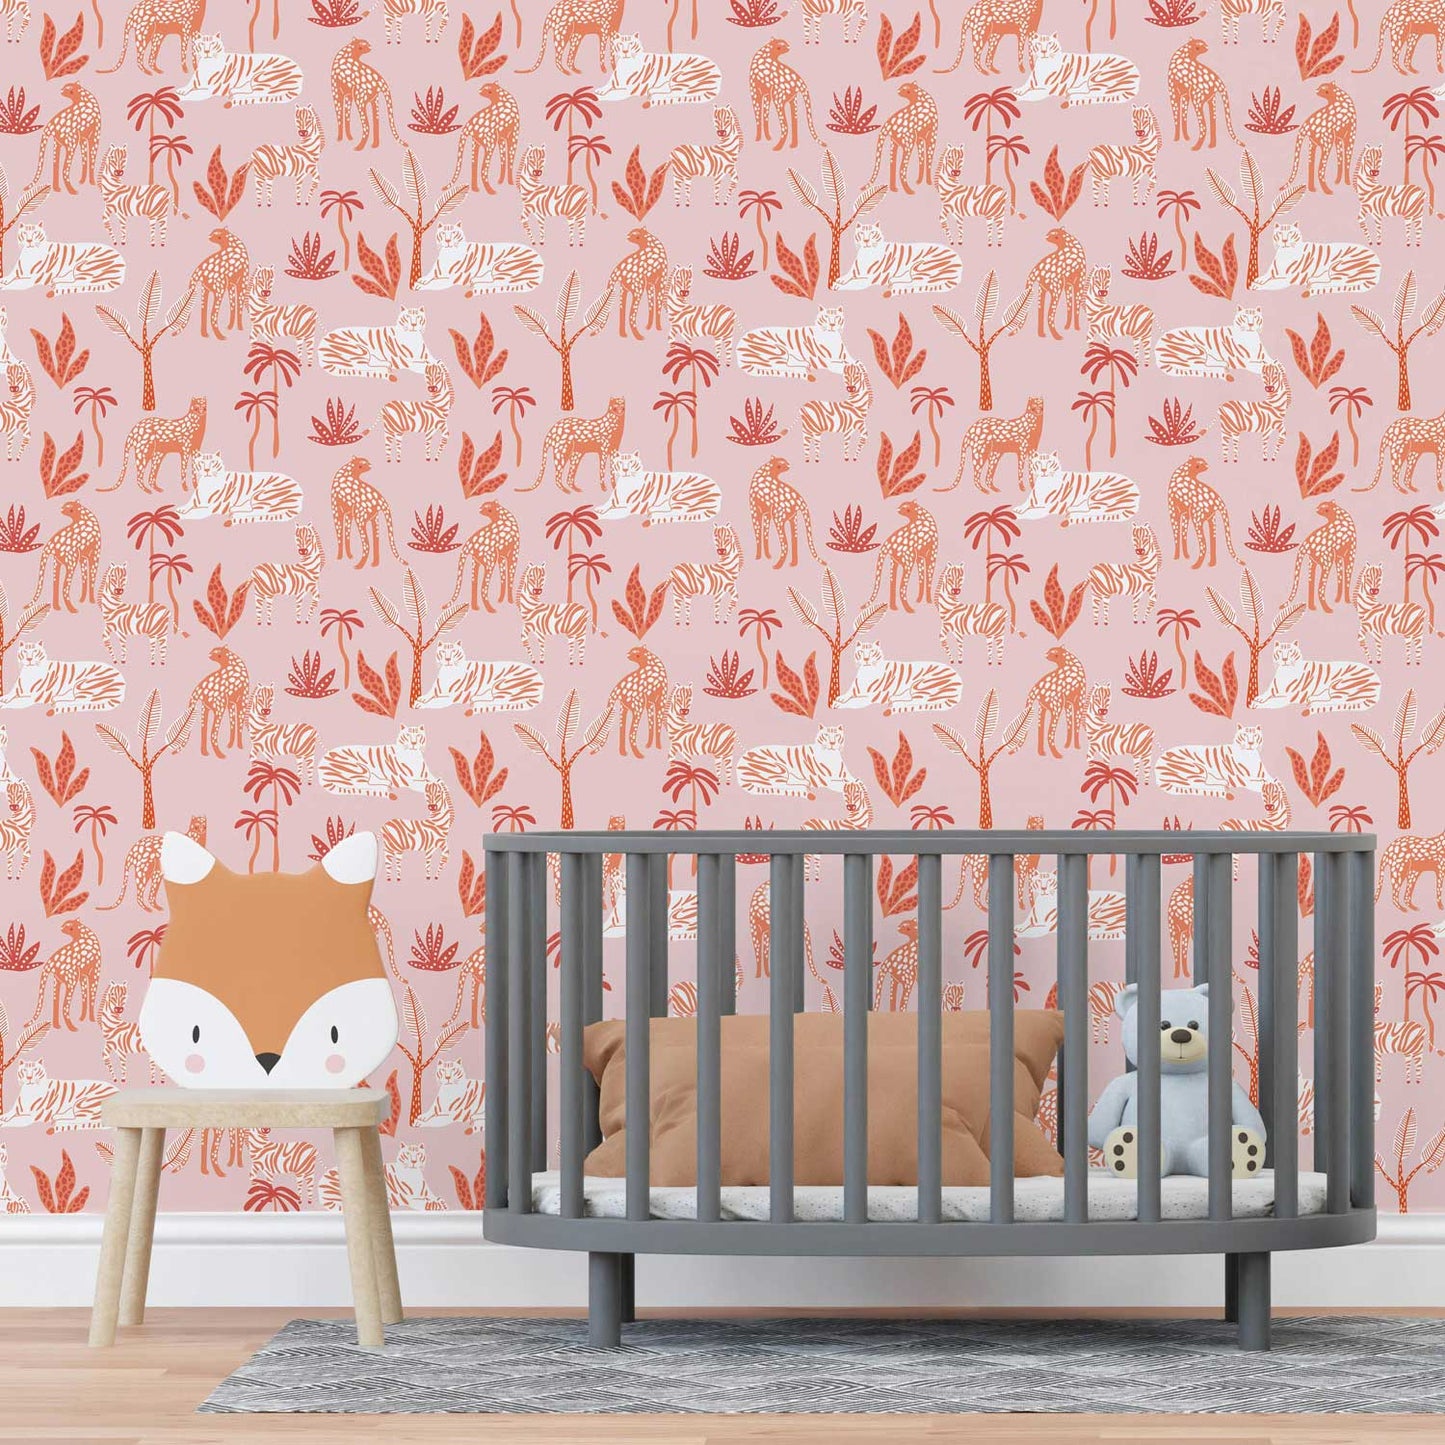 Nursery with dark grey crib and pink tropical wallpaper.